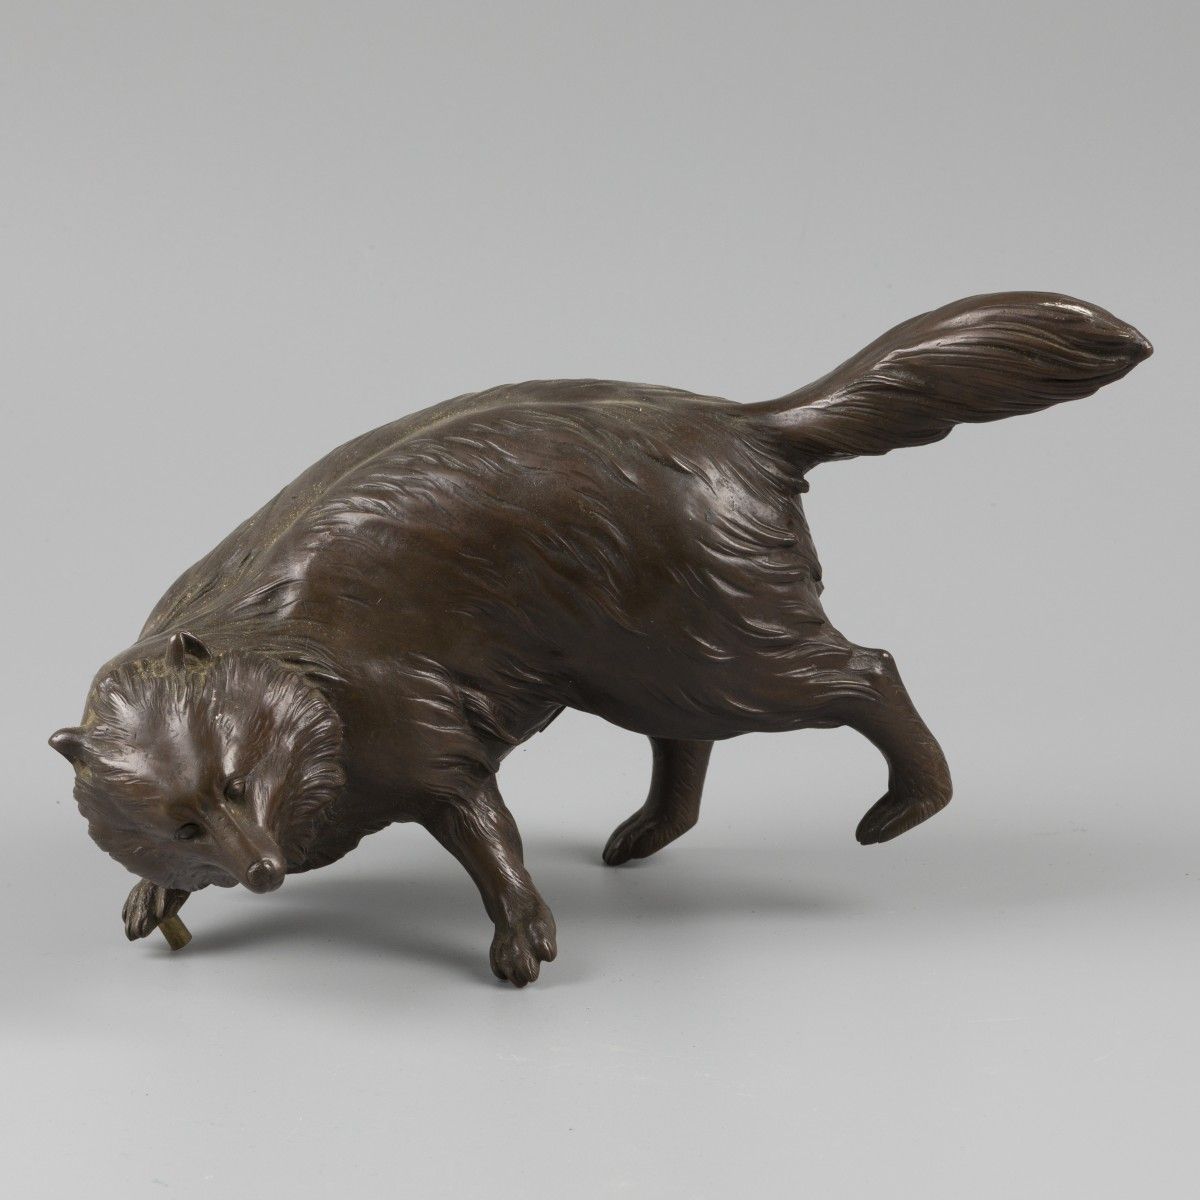 A bronze sculpture of a snow fox. Most likely part of a larger group or desk orn&hellip;